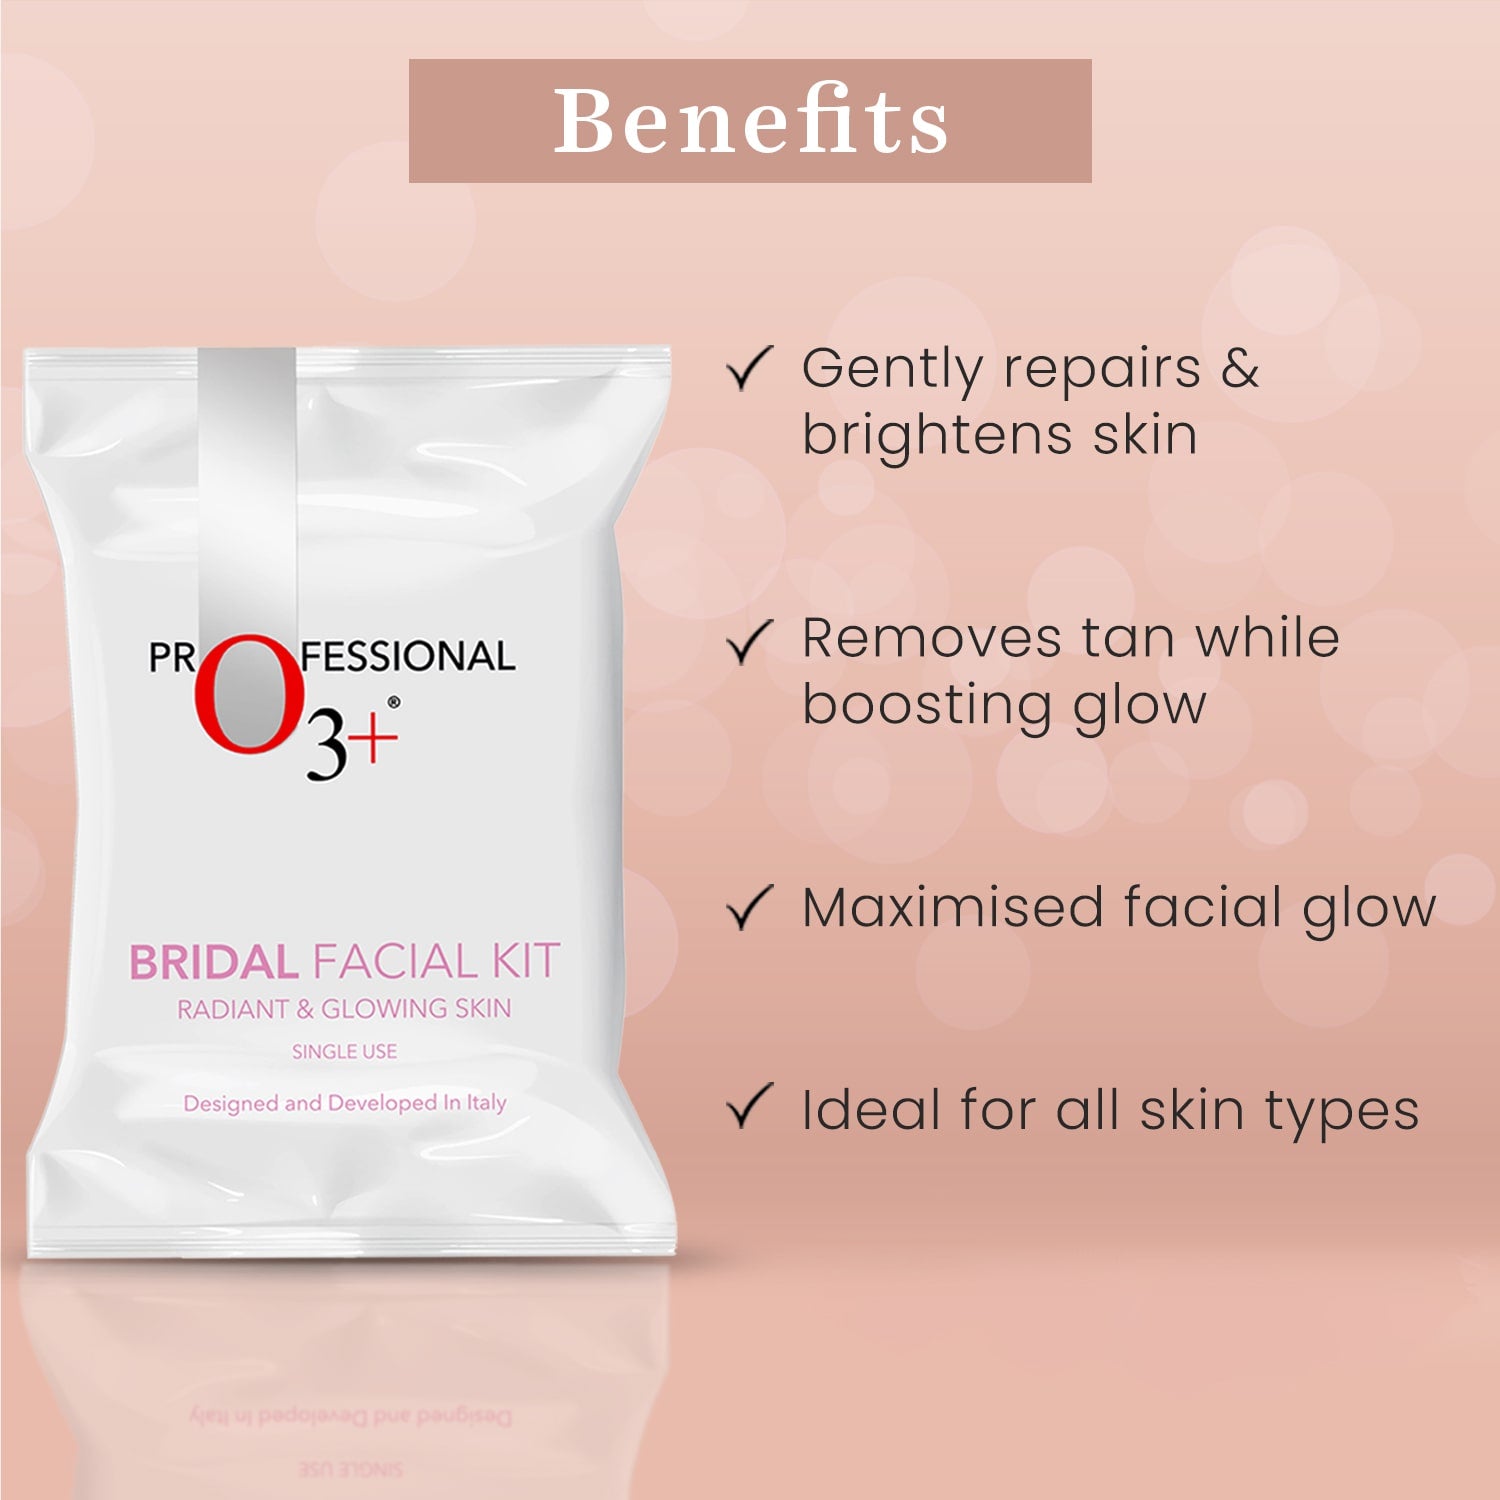 Radiance Skincare Combo With Bridal Facial Kit for Radiant & Glowing Skin 120g & UVA UVB Ultra Light Sunscreen With SPF50 PA+++ 75g |All Skin Type